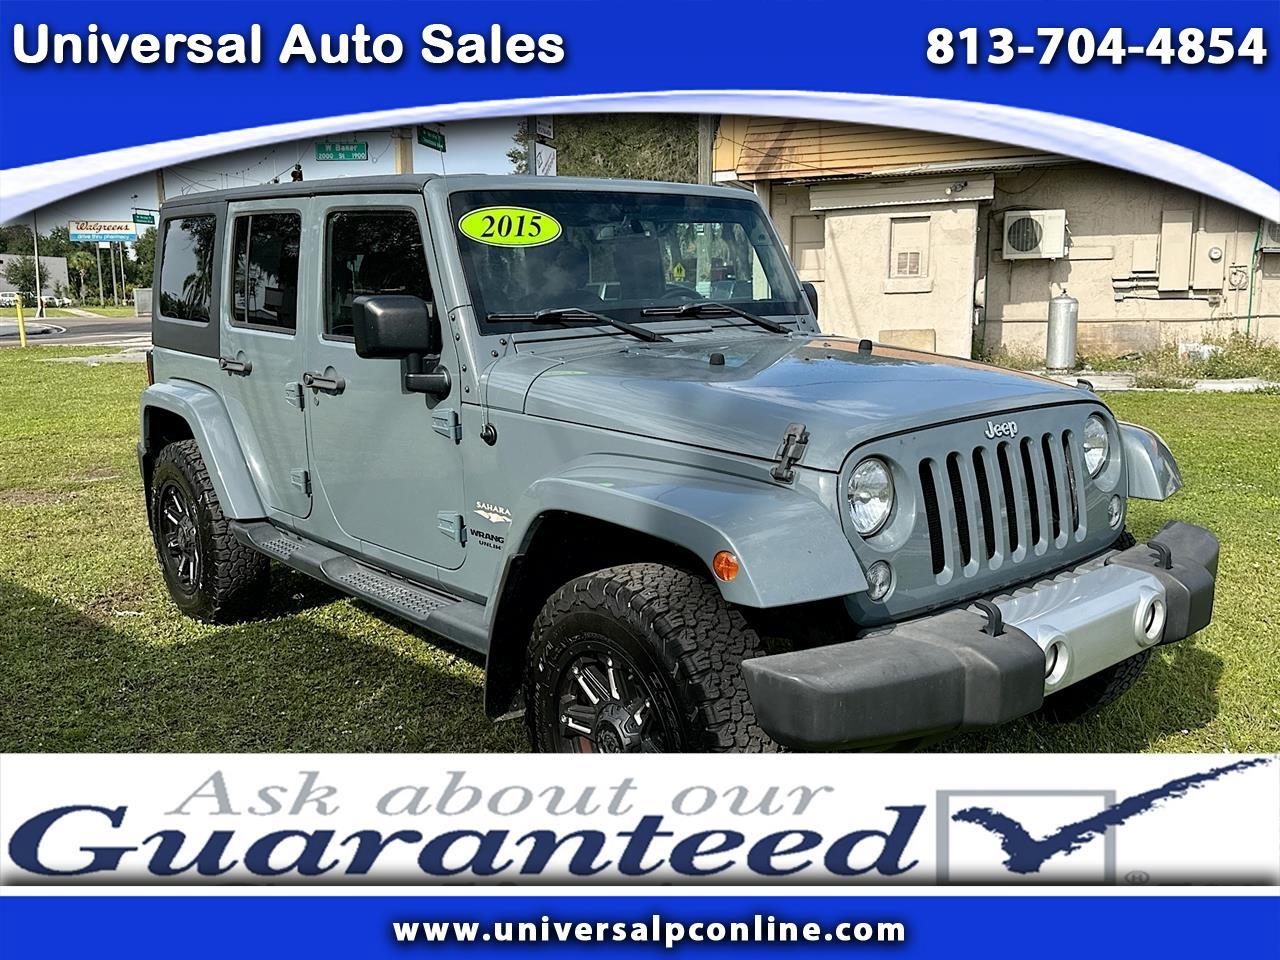 Used Cars for Sale Plant City FL 33567 Universal Auto Sales